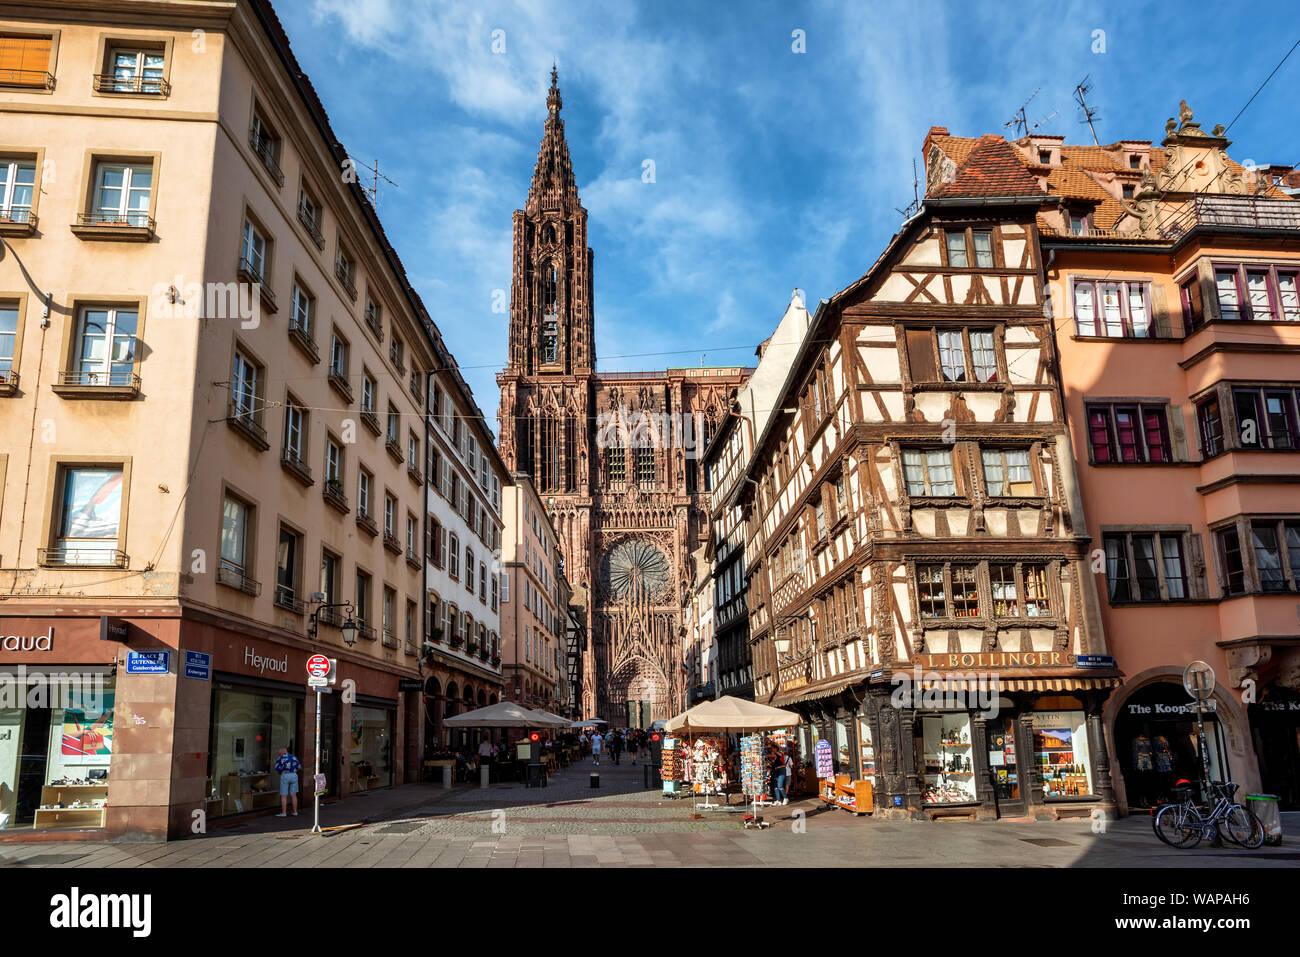 Strasbourg, France - June 23 2019: Strasbourg city center with historical half-timbered houses and beautiful gothic cathedral is a popular tourist des Stock Photo